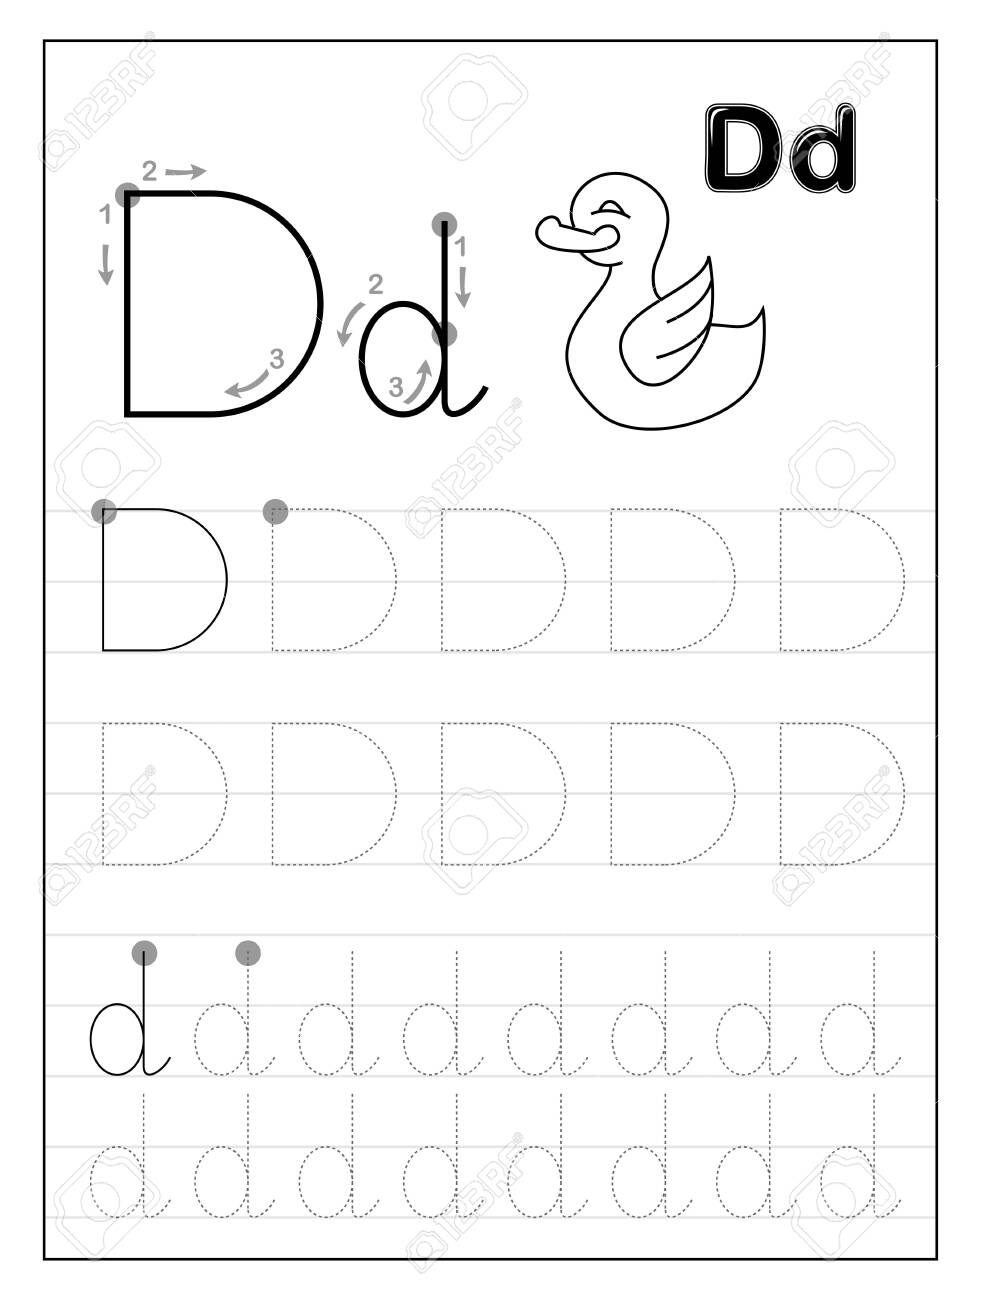 Tracing Alphabet Letter D. Black And White Educational Pages.. pertaining to Letter D Worksheets